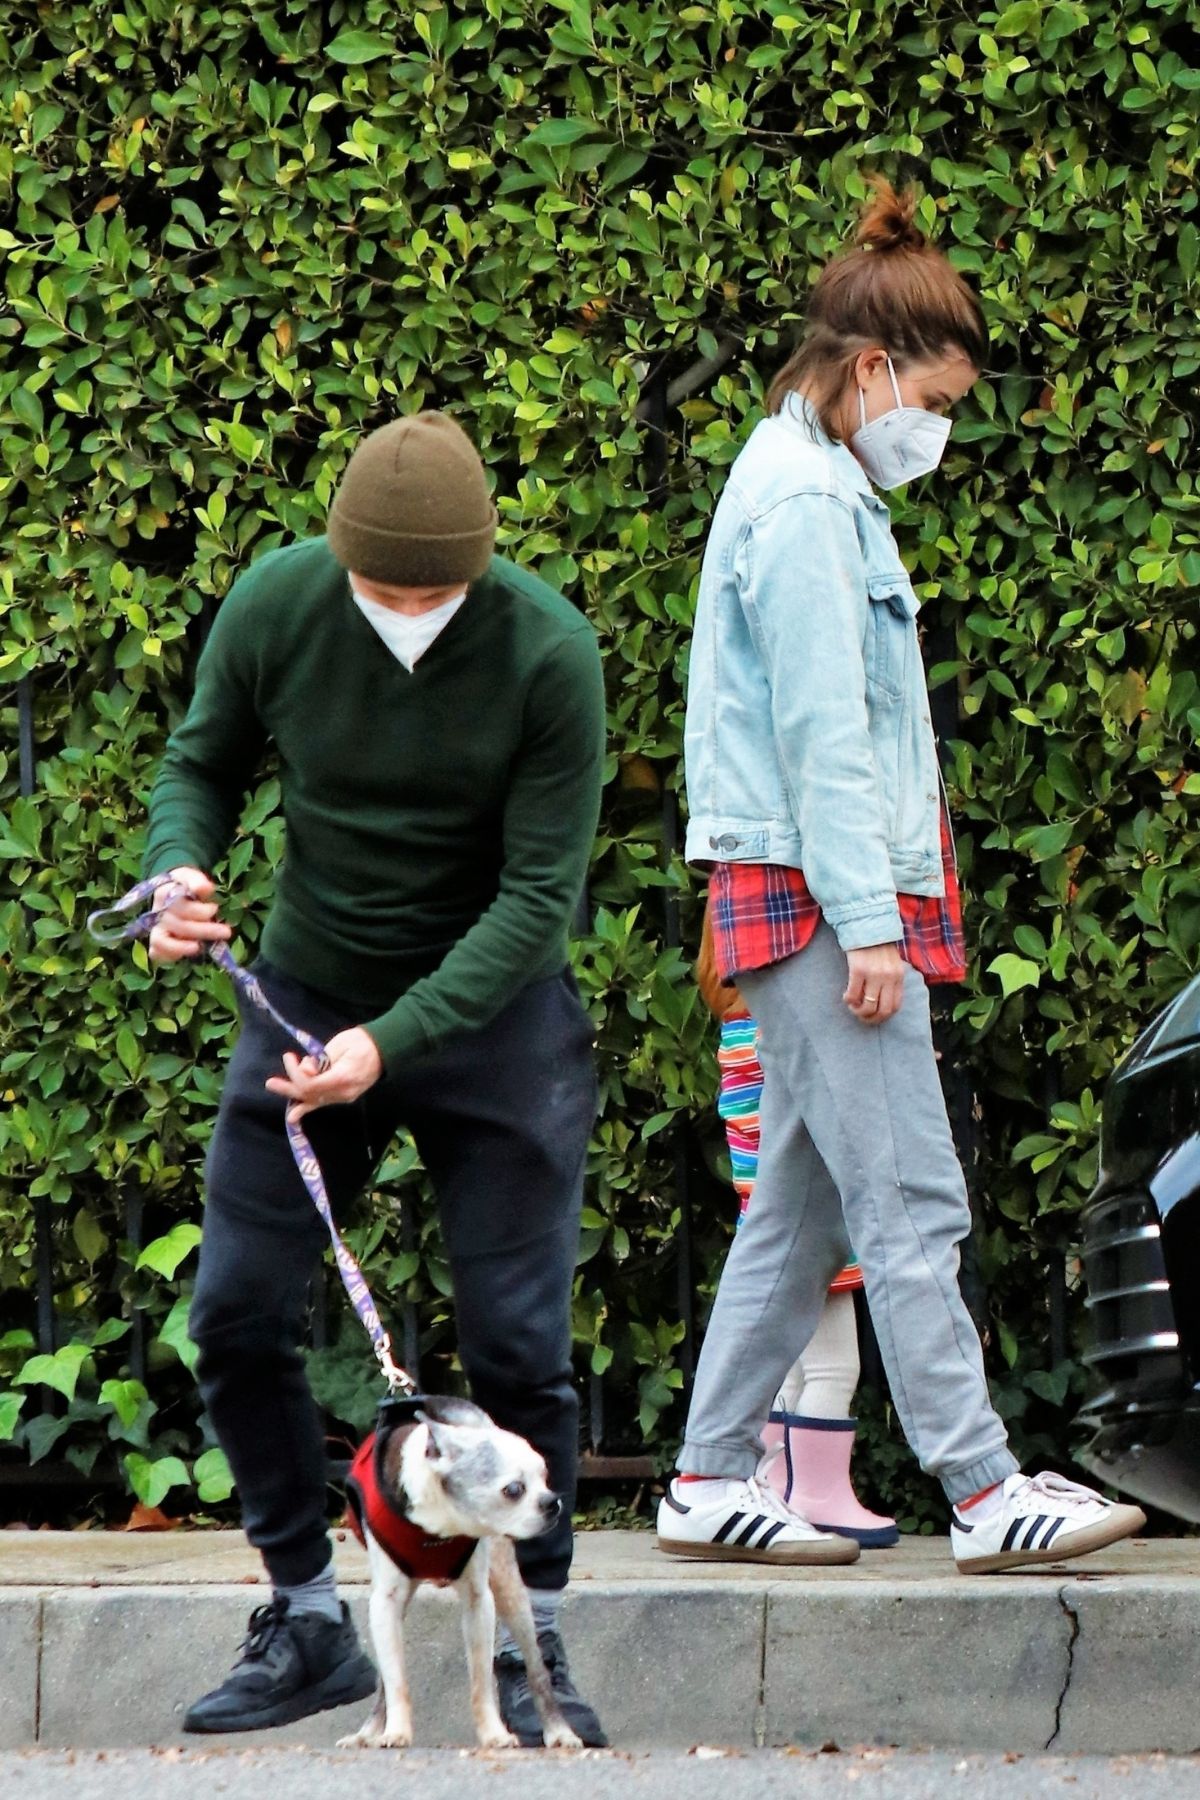 kate-mara-and-jamie-bell-out-at-griffith-park-in-los-feliz-12-30-2020-1.jpg